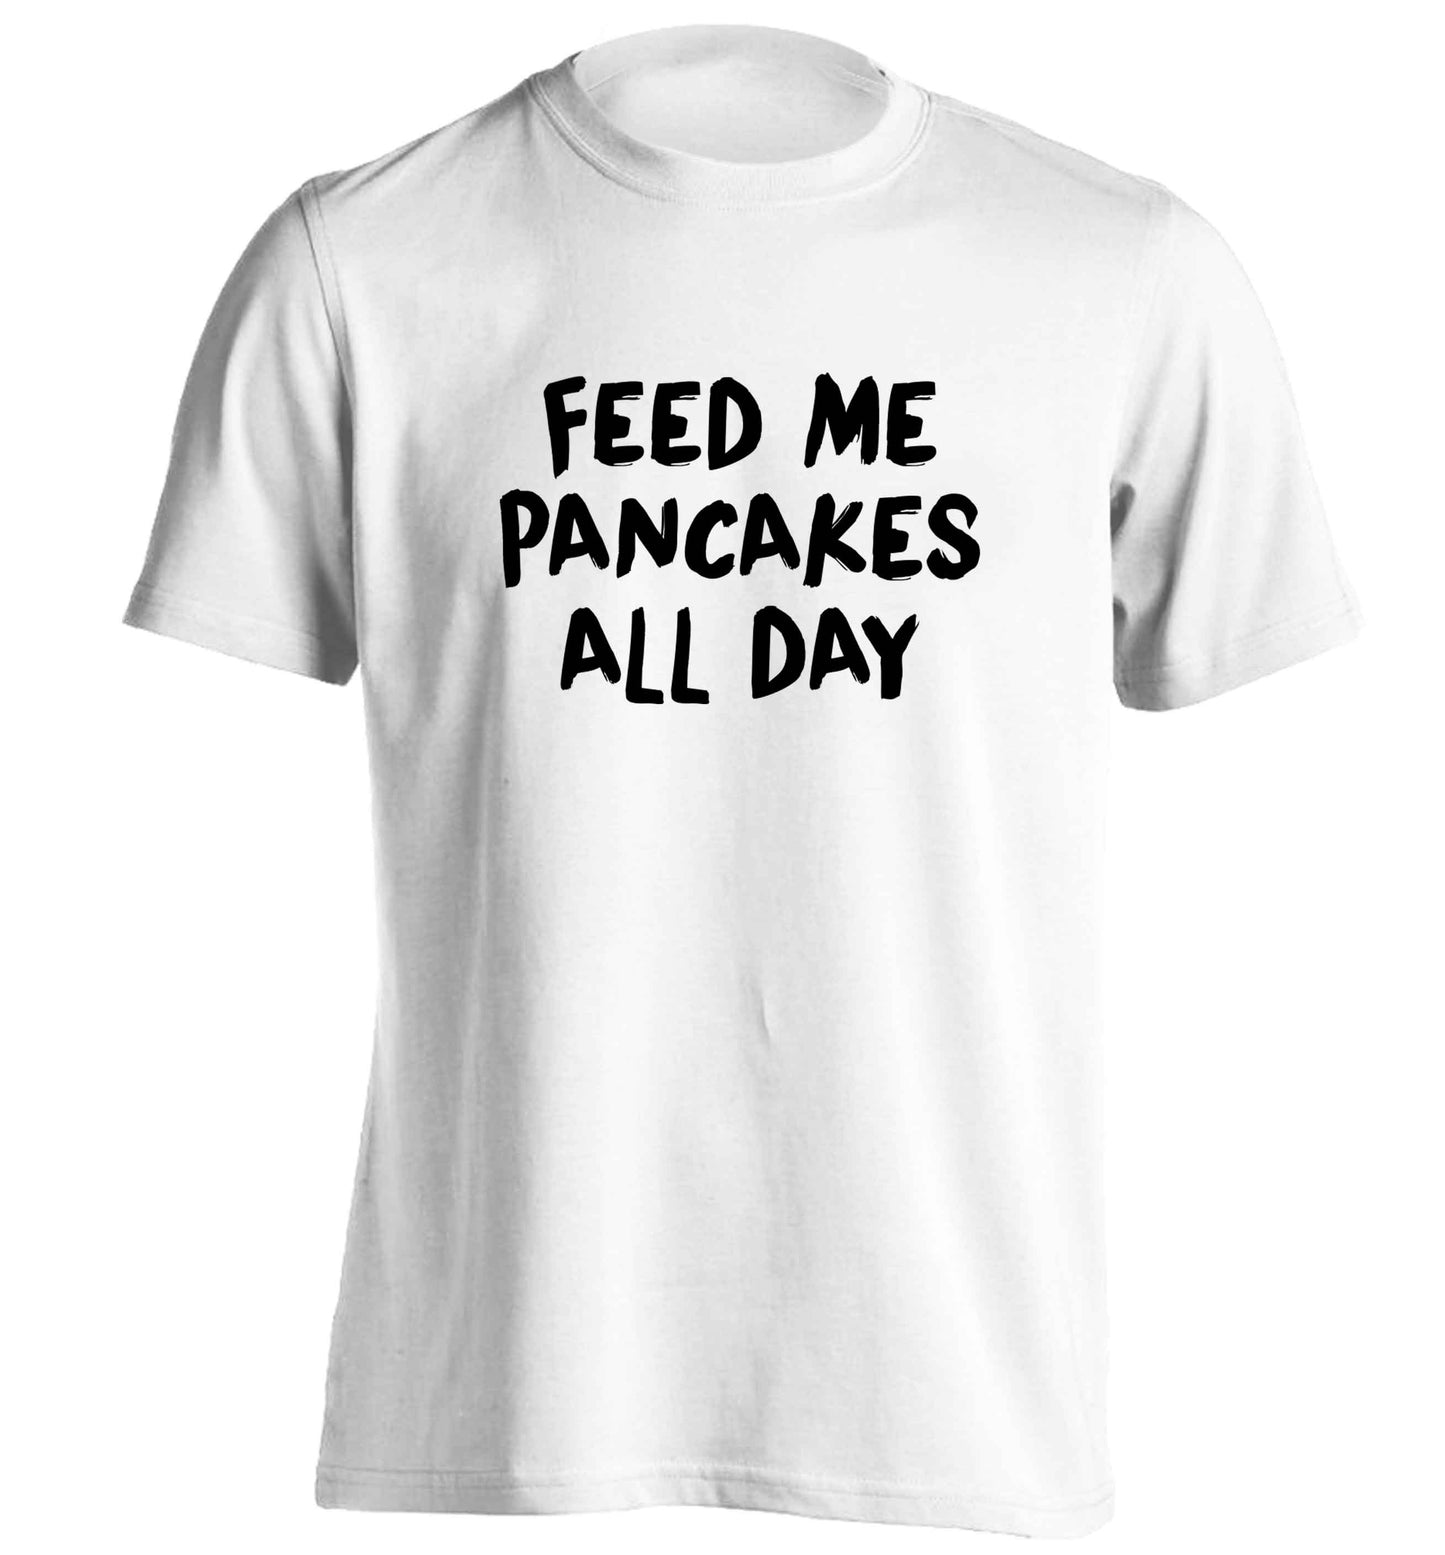 Feed me pancakes all day adults unisex white Tshirt 2XL